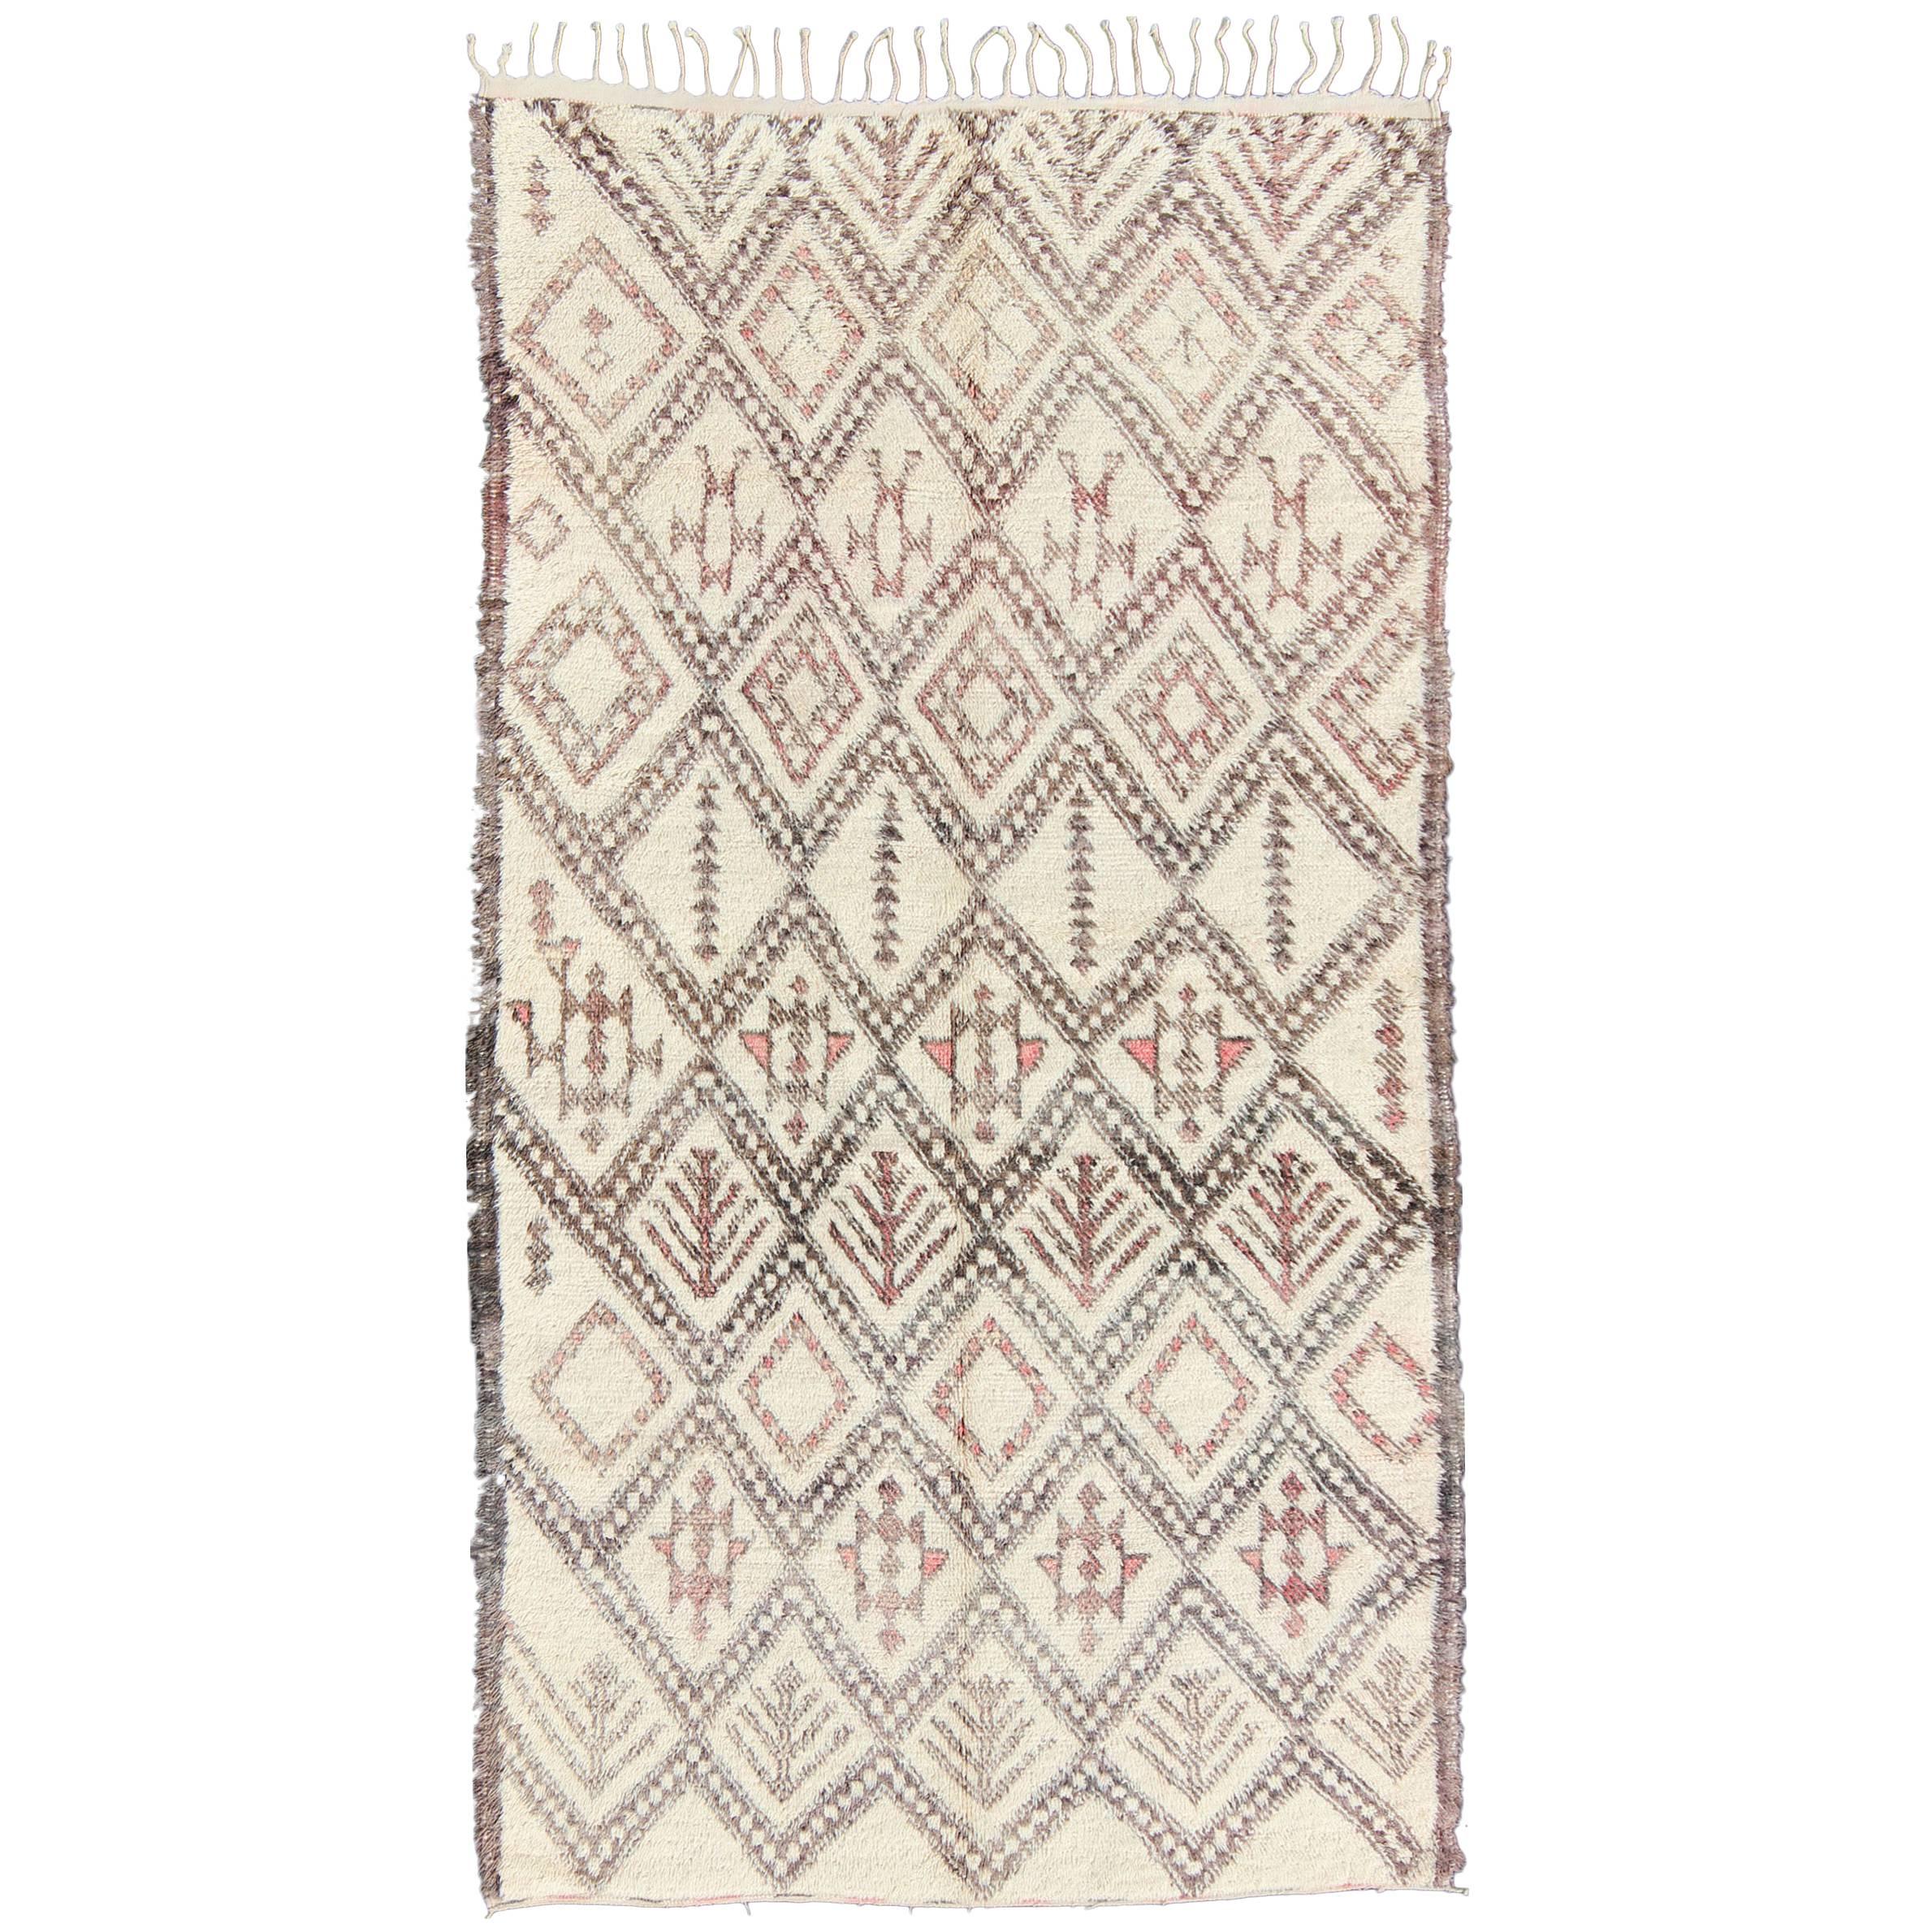 Large Moroccan Beni Ouarain Rug with Diamond Design in Light Ivory, Gray & Pink